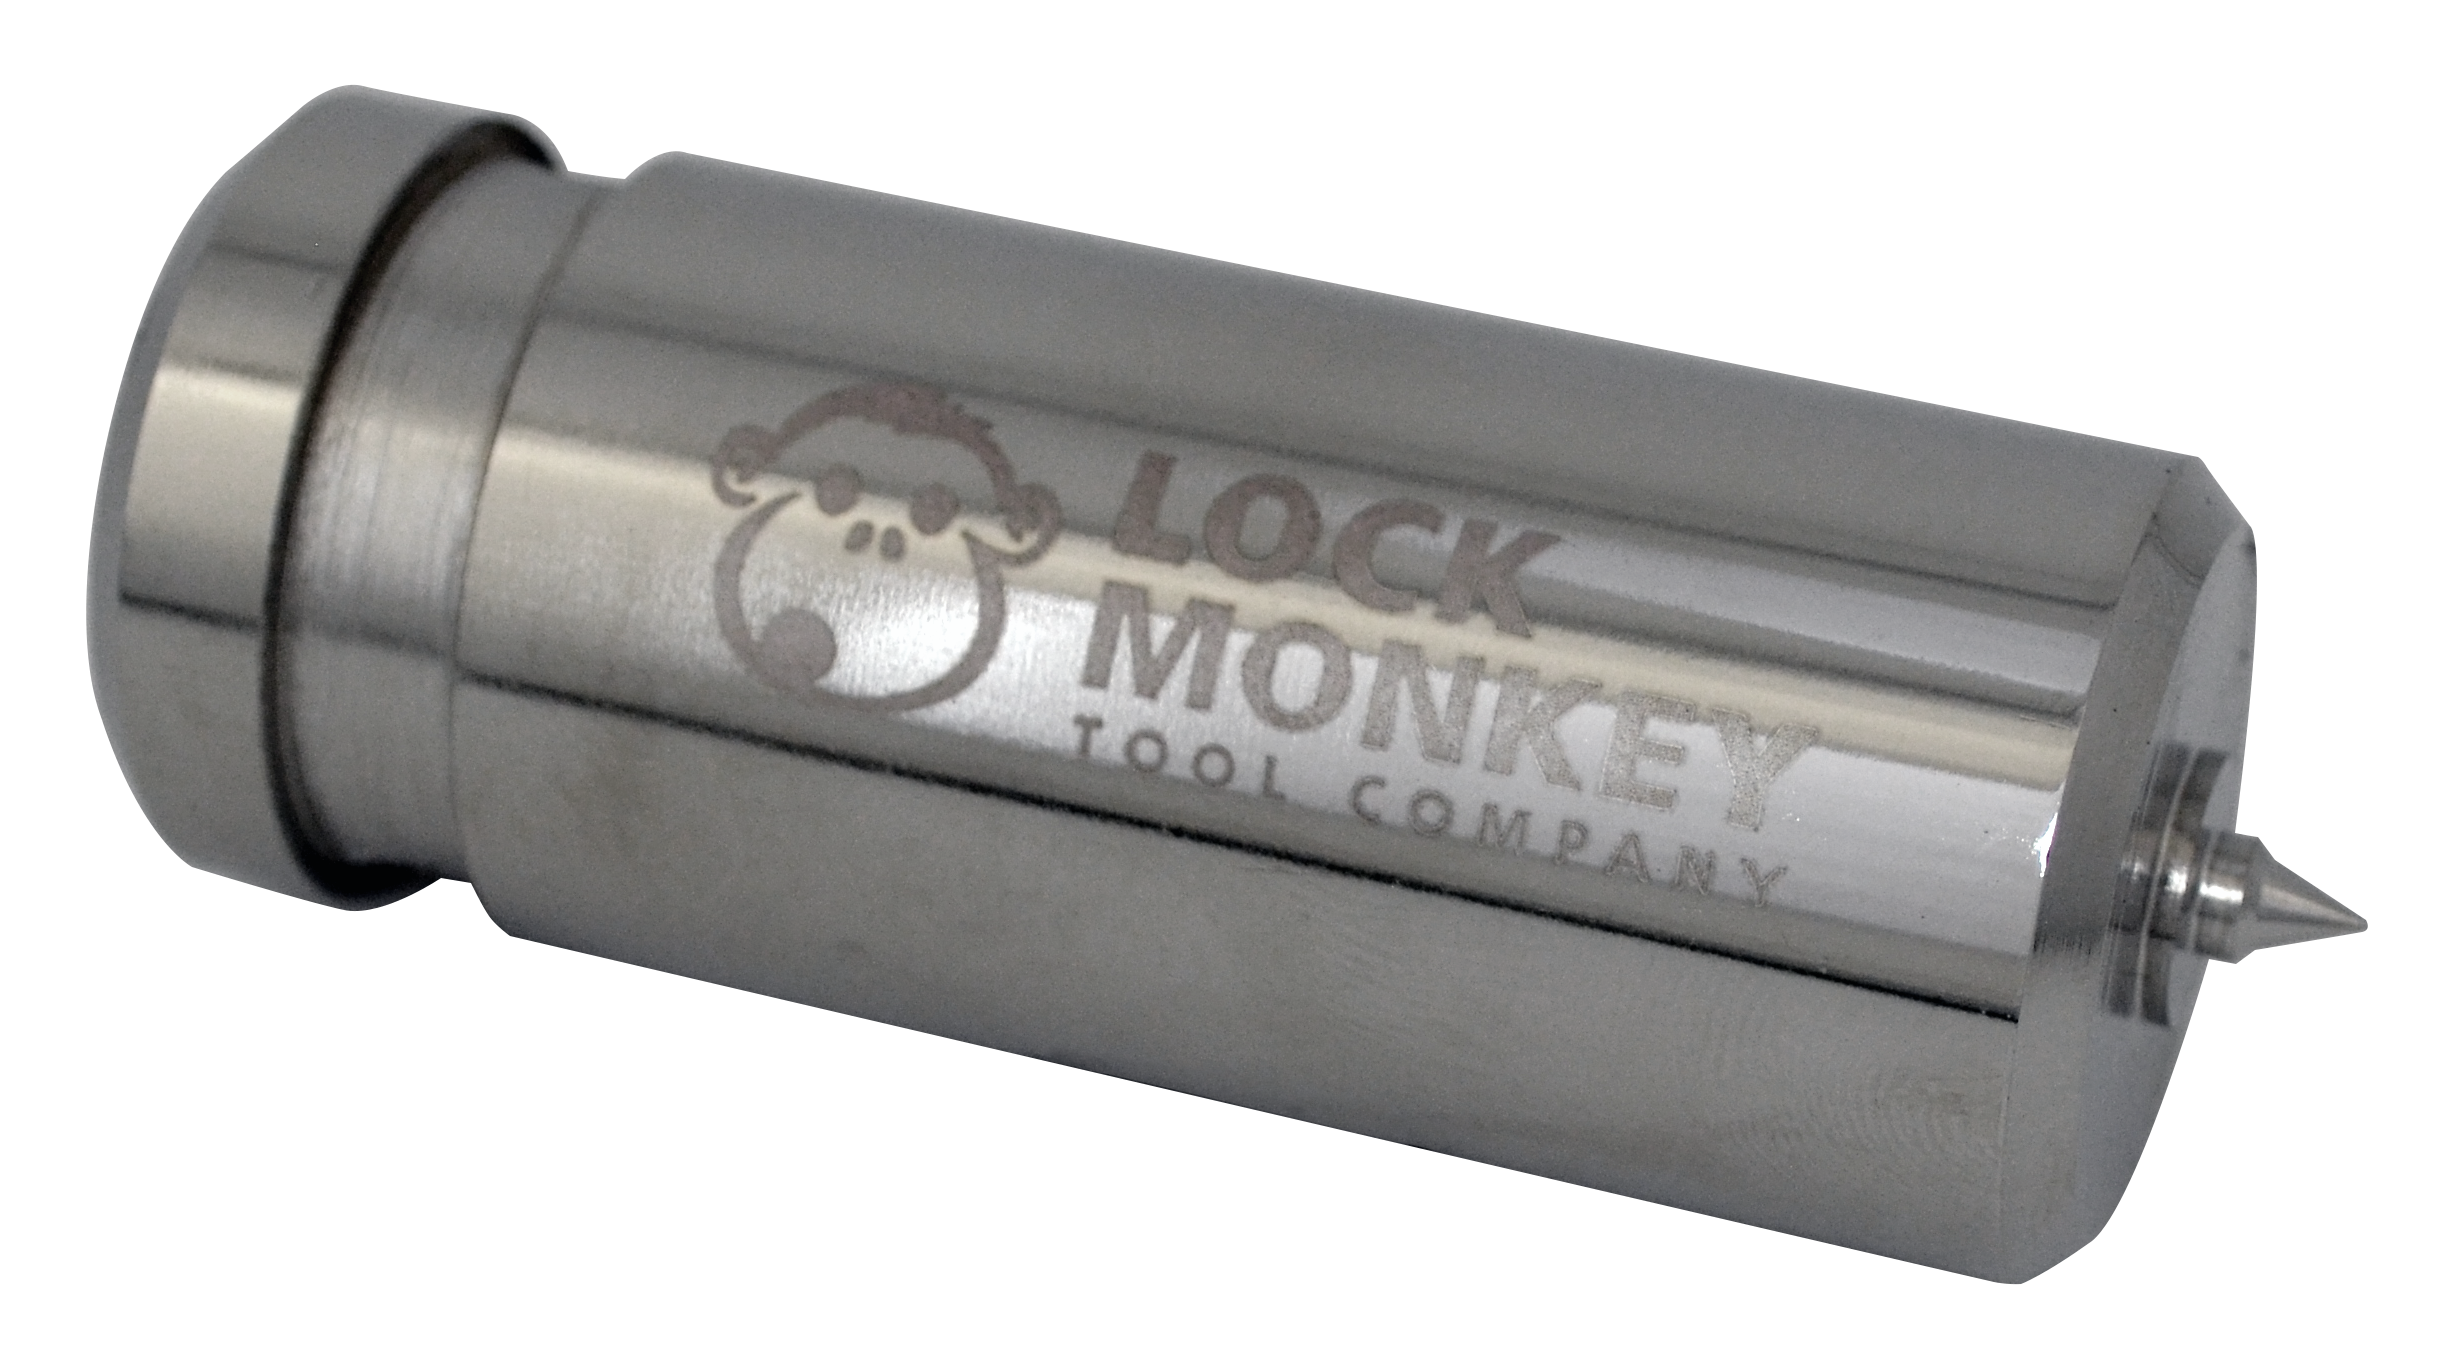 Door Strike Locator - Lock Monkey - Locksmith tools -  For prepping a door for a new cylindrical lock - MK300 - Stainless Steel